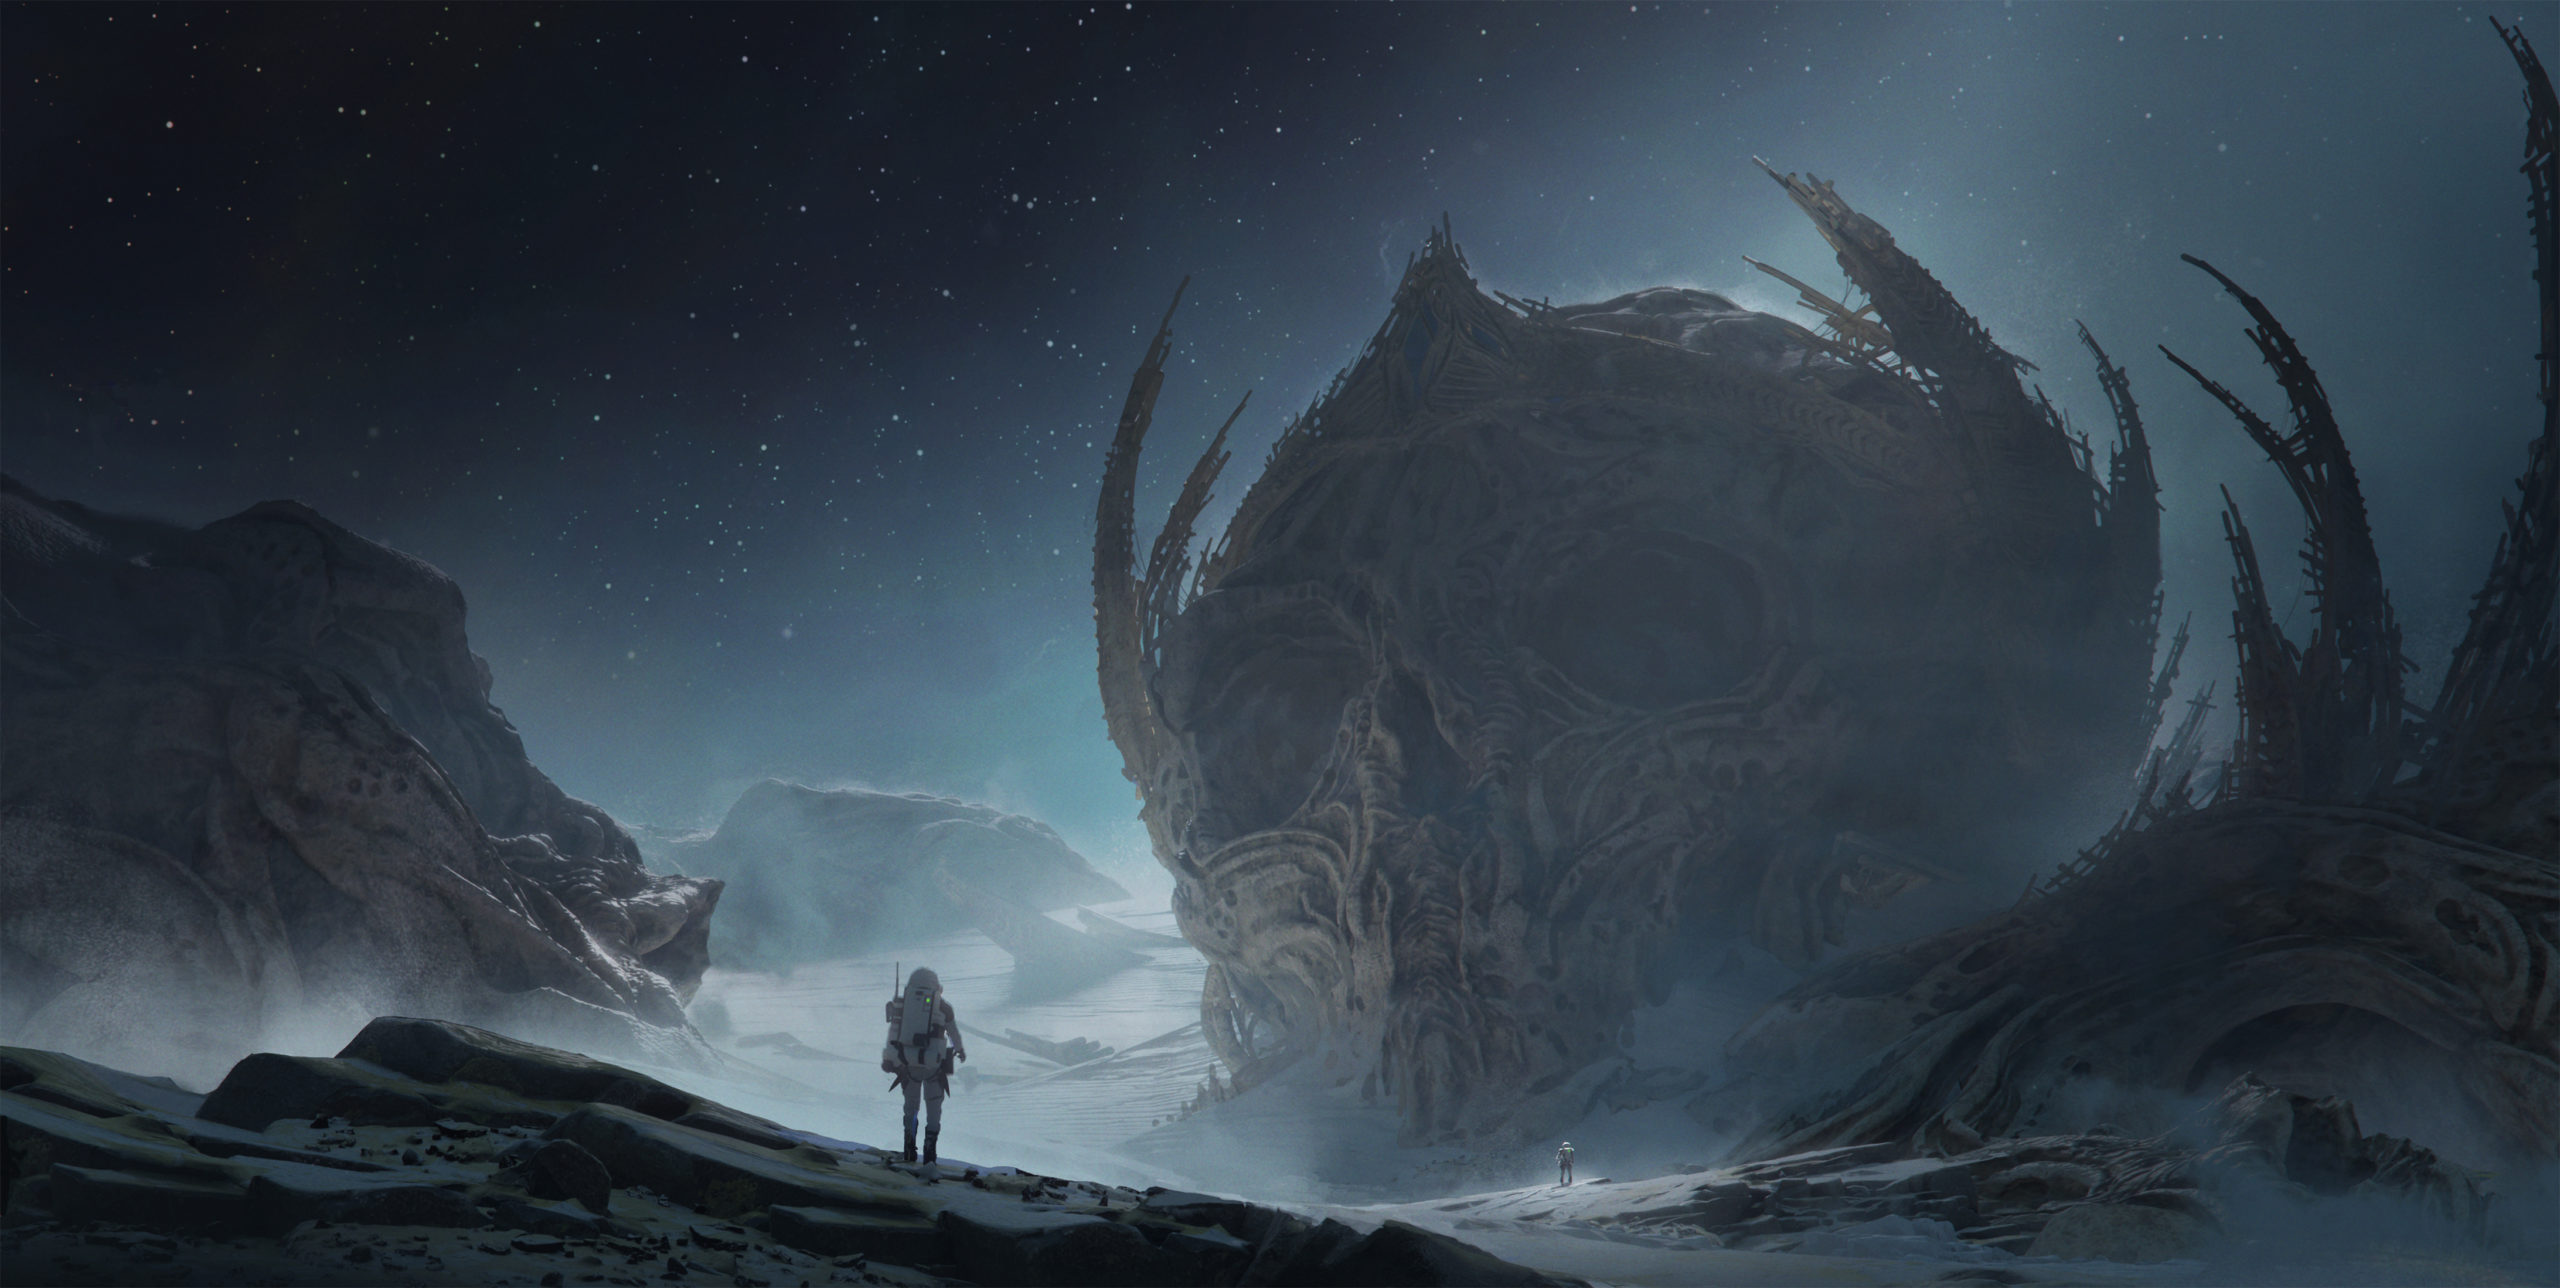 two astronauts on an ominous planet with a large skull looming over